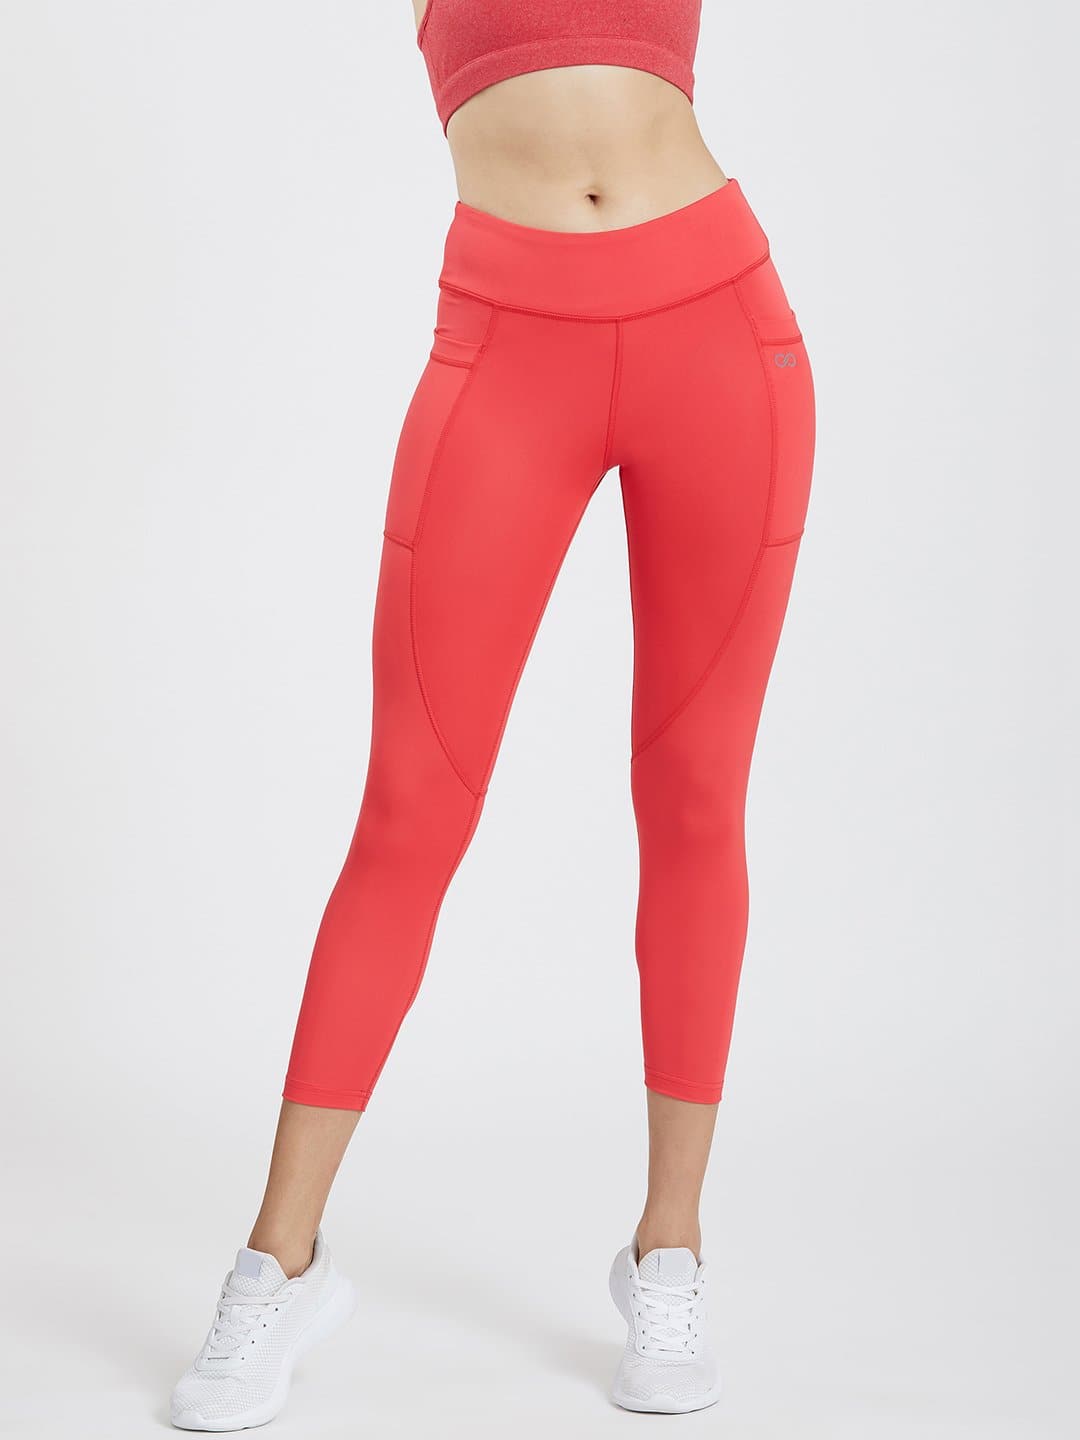 Maxtreme Power me Flame Red Ankle Pocket Leggings